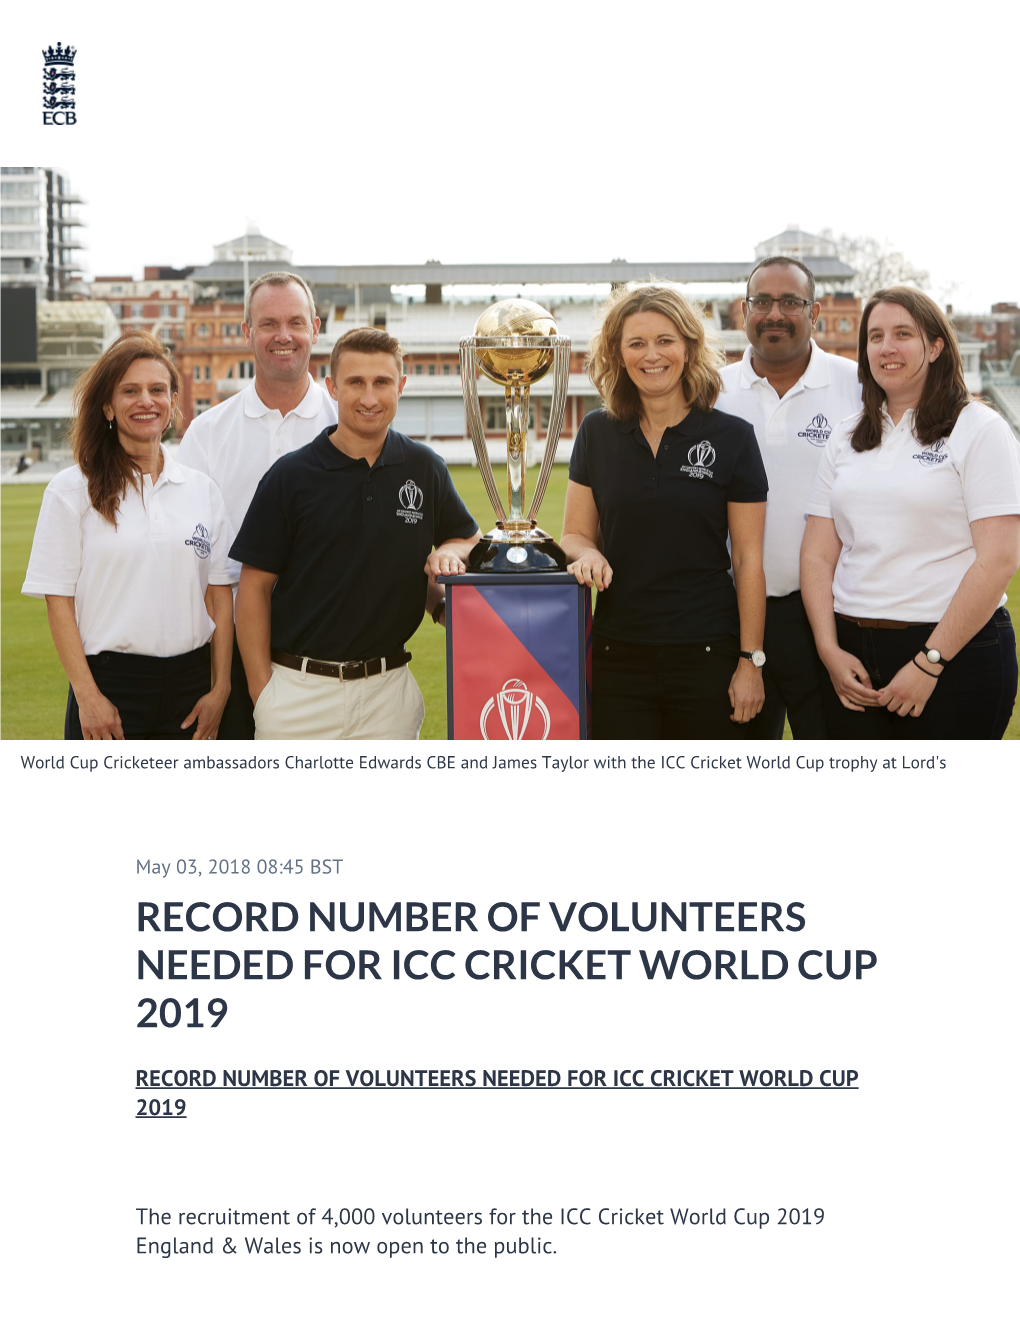 Record Number of Volunteers Needed for Icc Cricket World Cup 2019